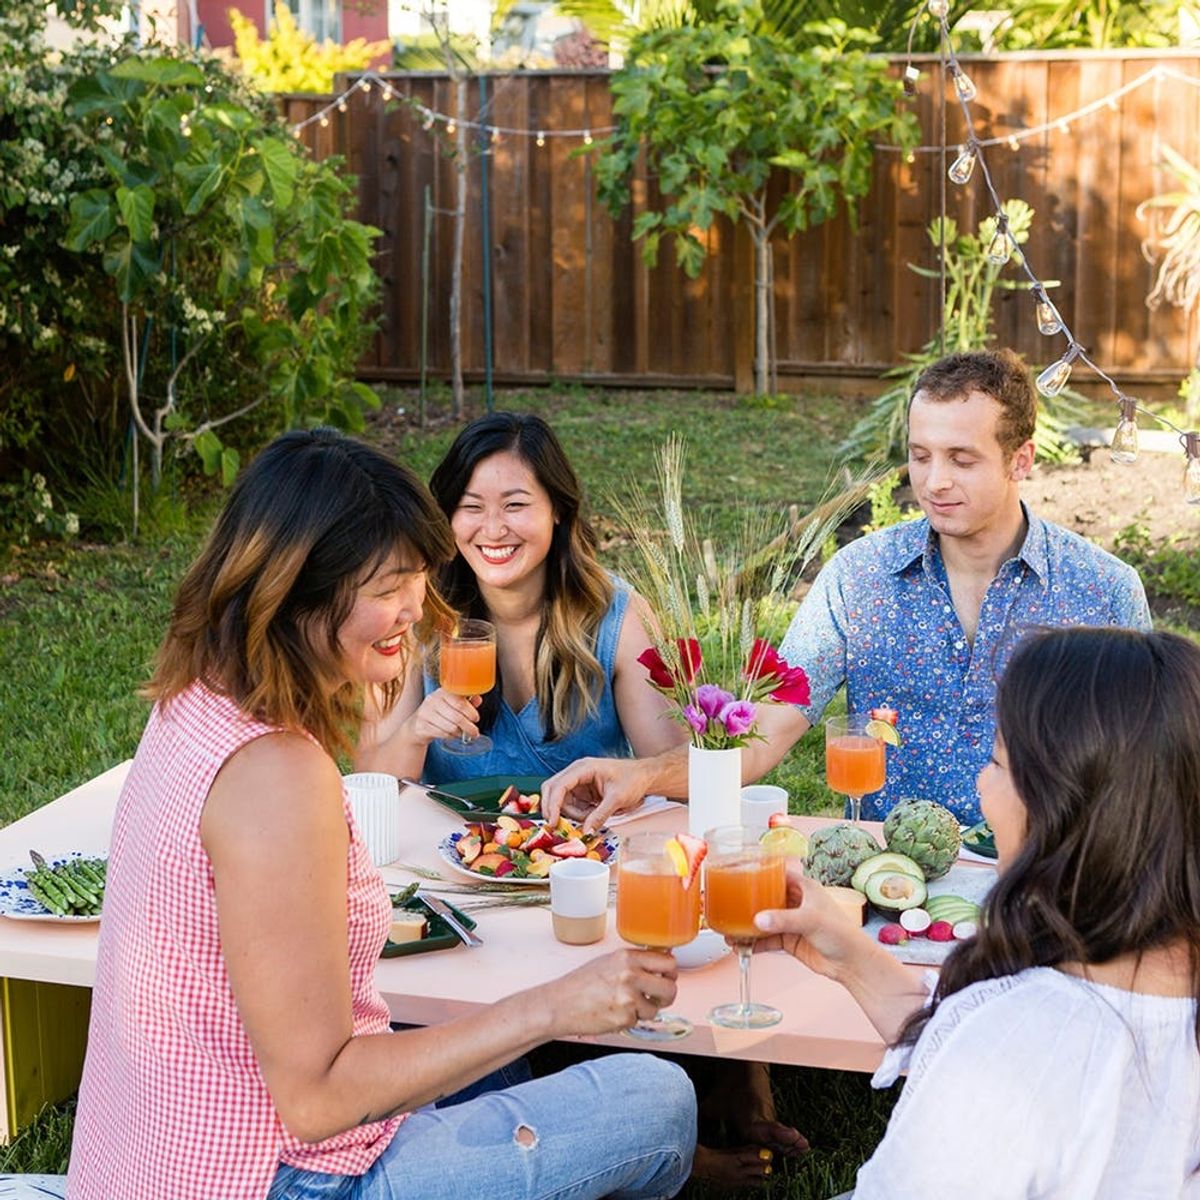 Throw the Ultimate Backyard Dinner With These Three Simple IKEA Hacks